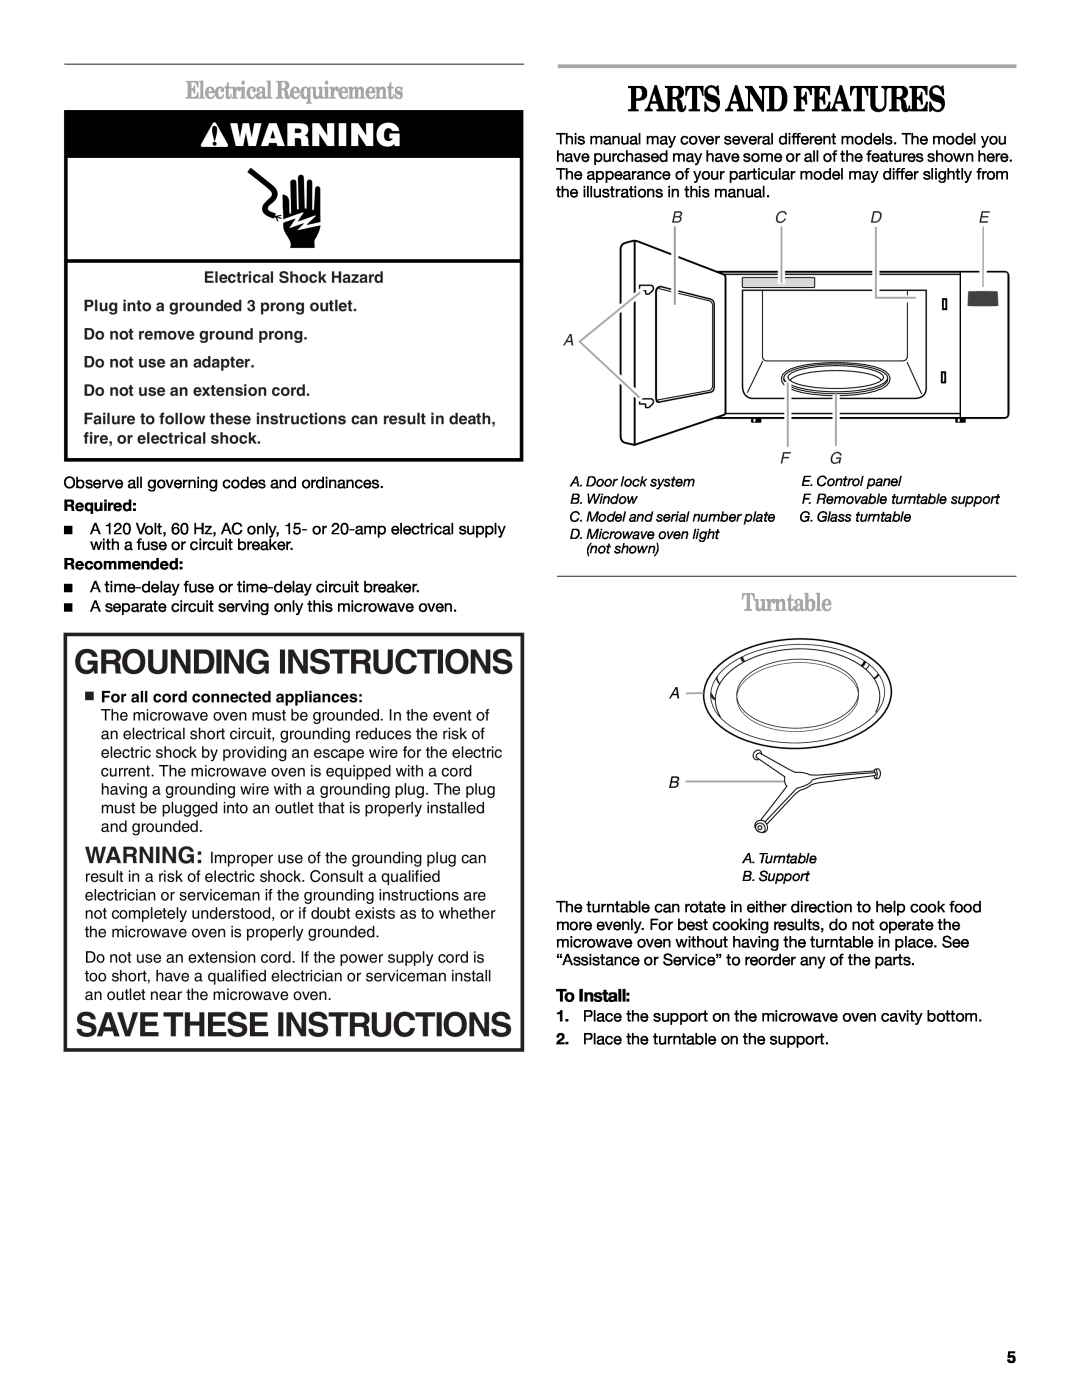 Whirlpool WMC1070 Parts And Features, Grounding Instructions, ElectricalRequirements, Turntable, Save These Instructions 